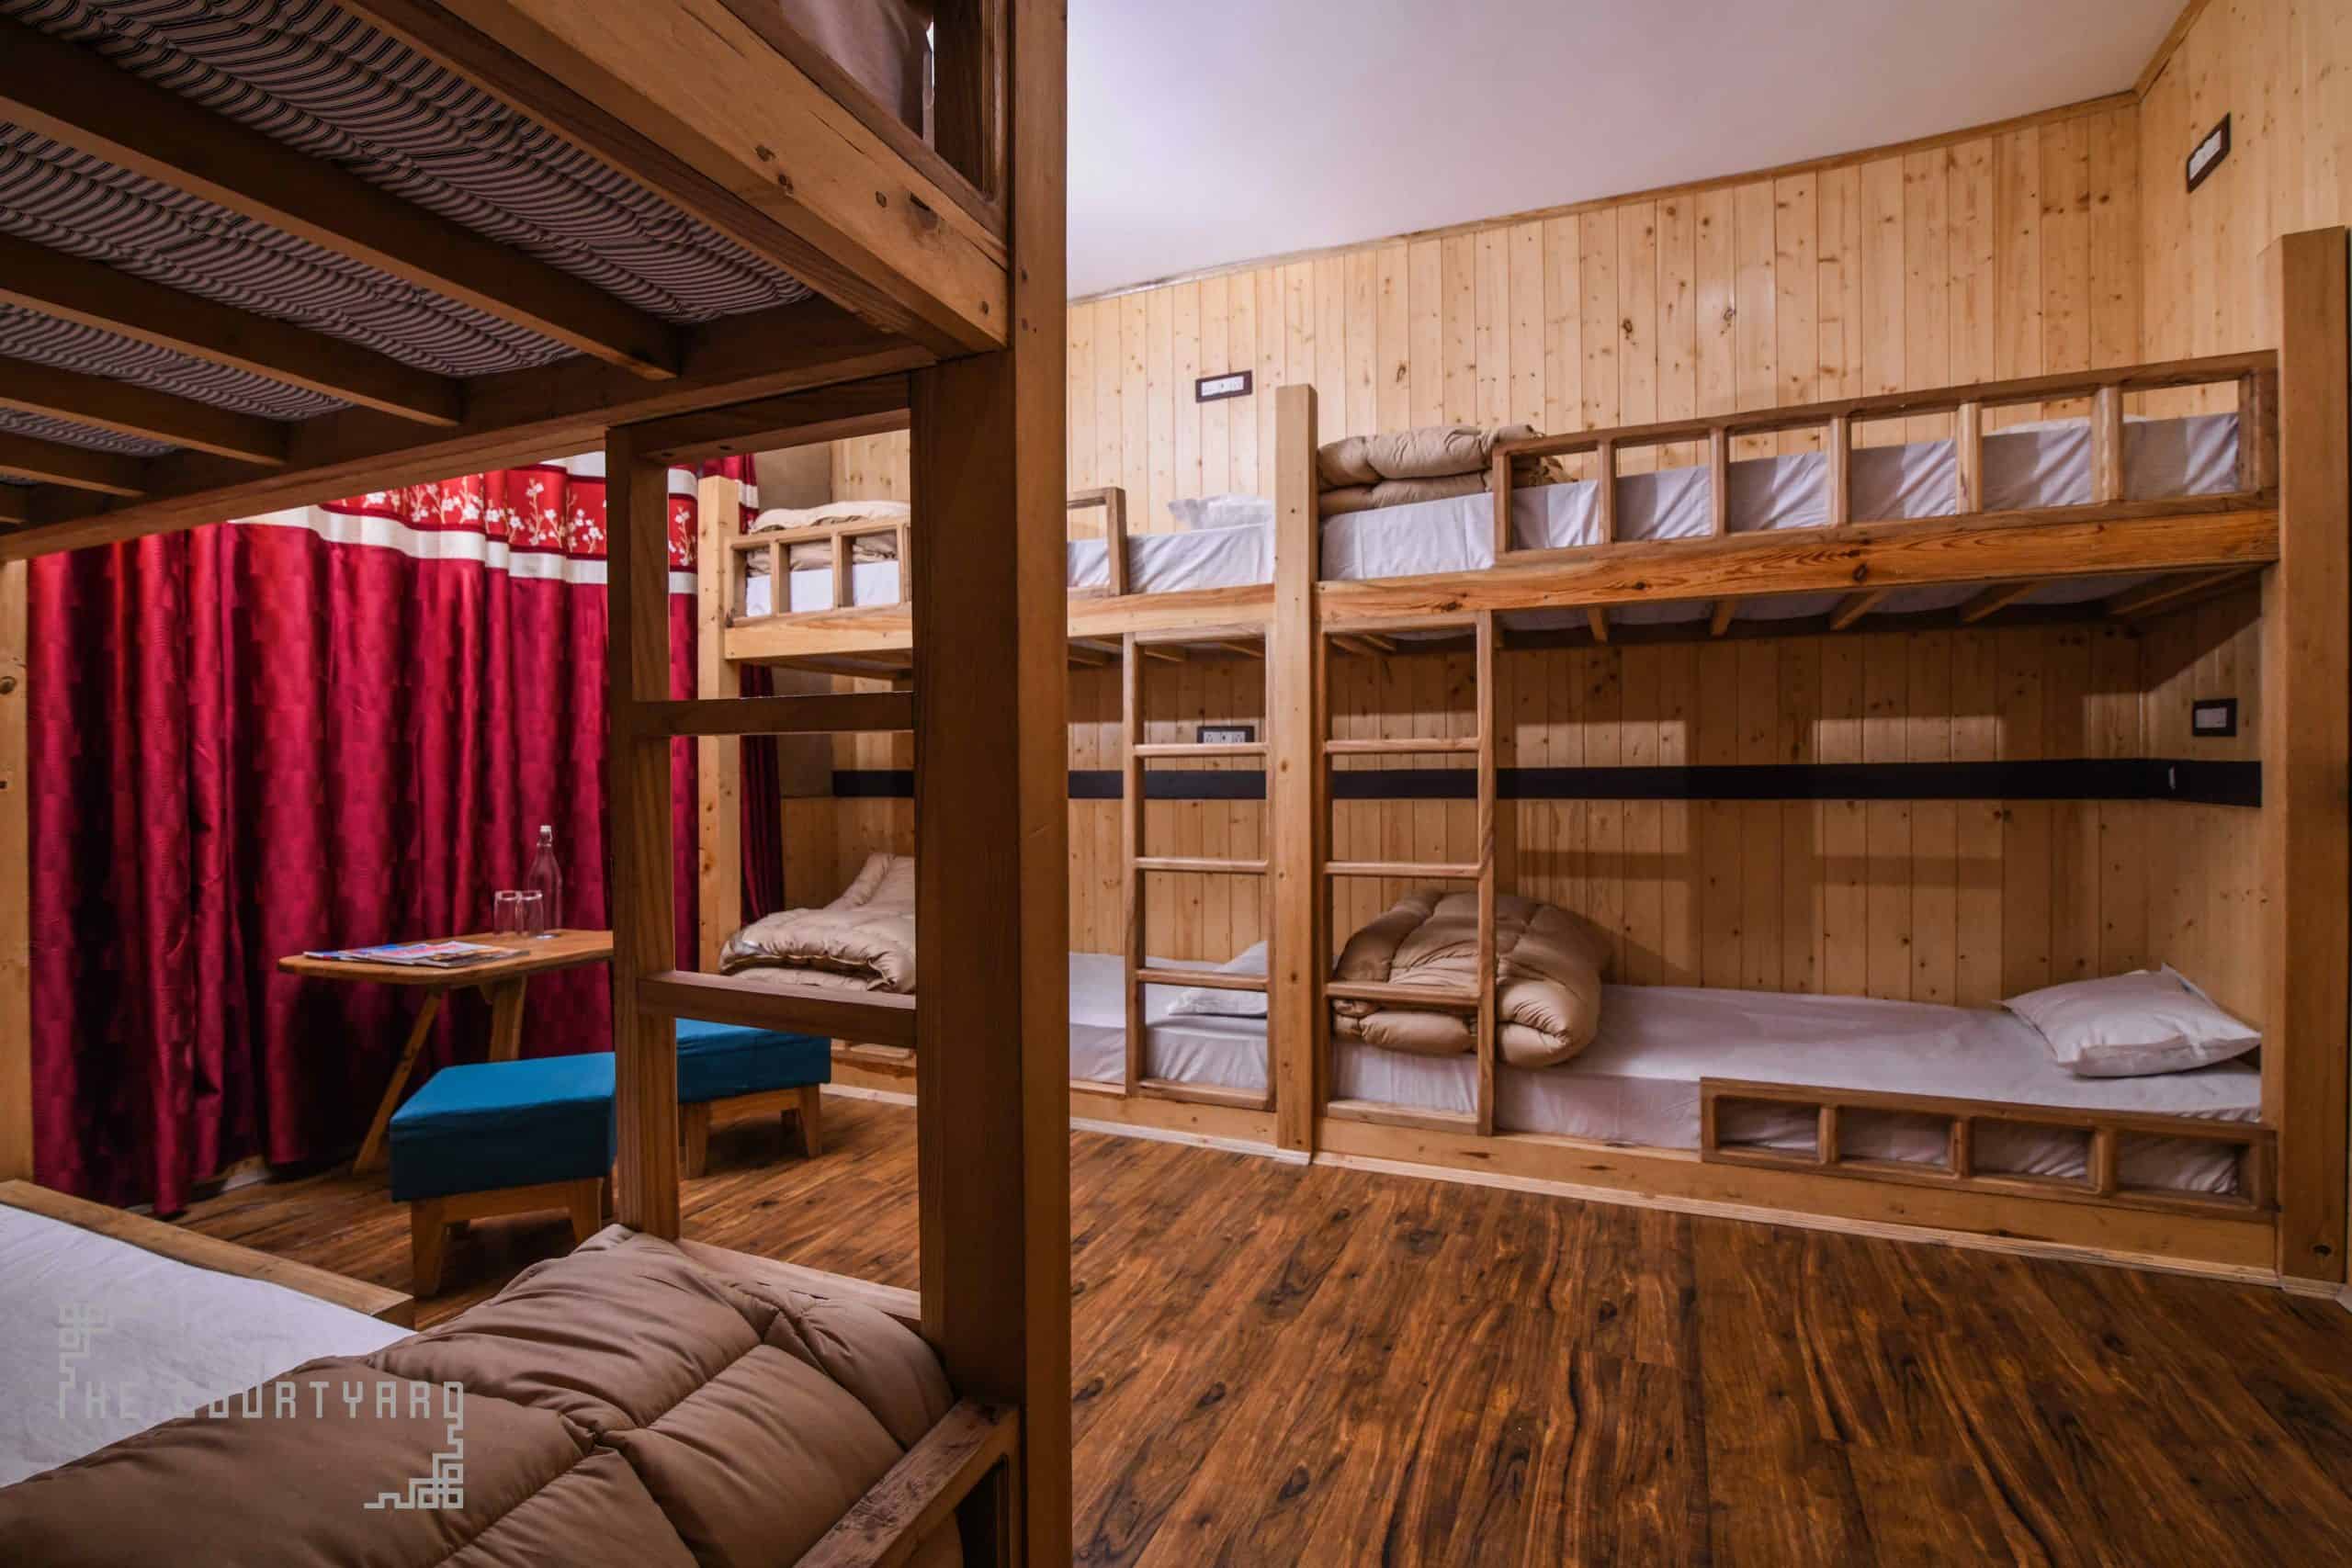 The Dorm Style Rooms with Bunk Beds - The Courtyard Hostel in Leh - Bunks & Beds